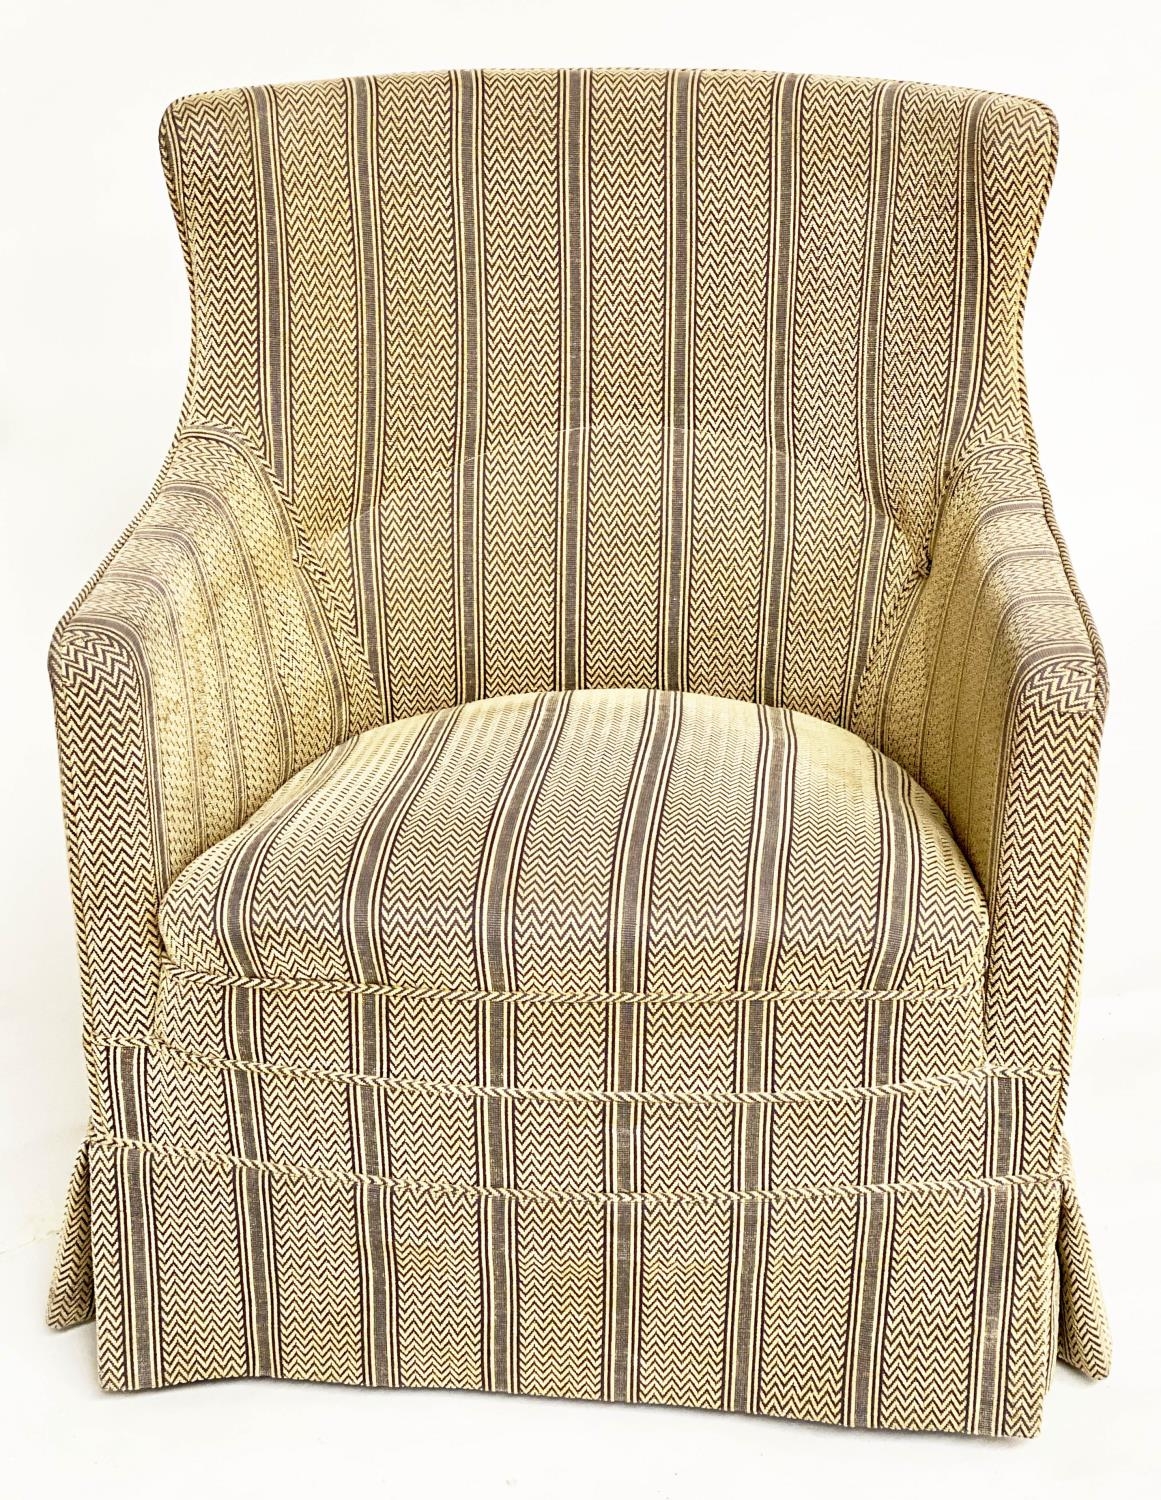 ARMCHAIR, Edwardian style striped herringbone taupe fabric with straight back and skirts, 82cm W. - Bild 7 aus 9